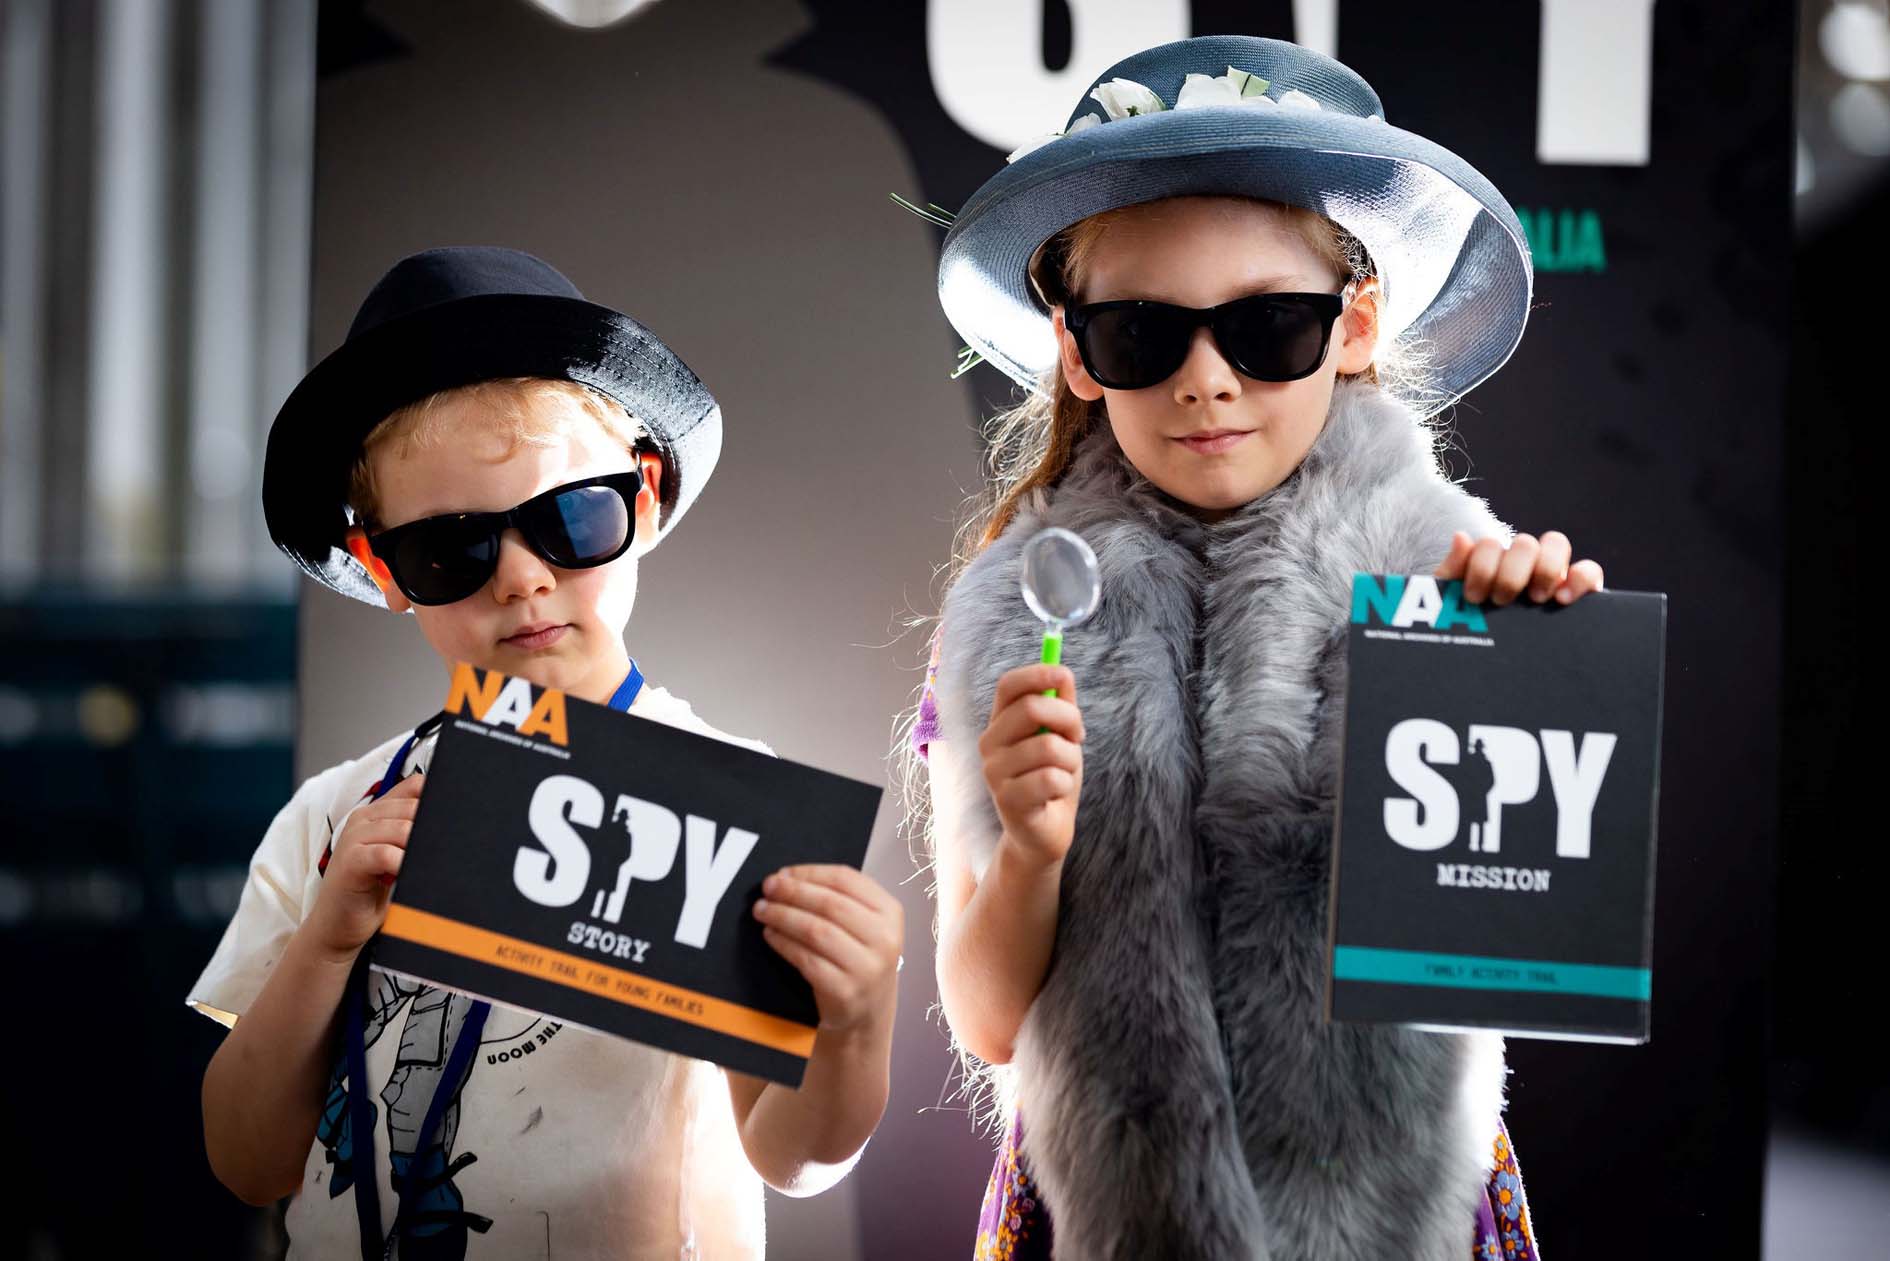 Spy Espionage has opened at The Workshops Rail Museum